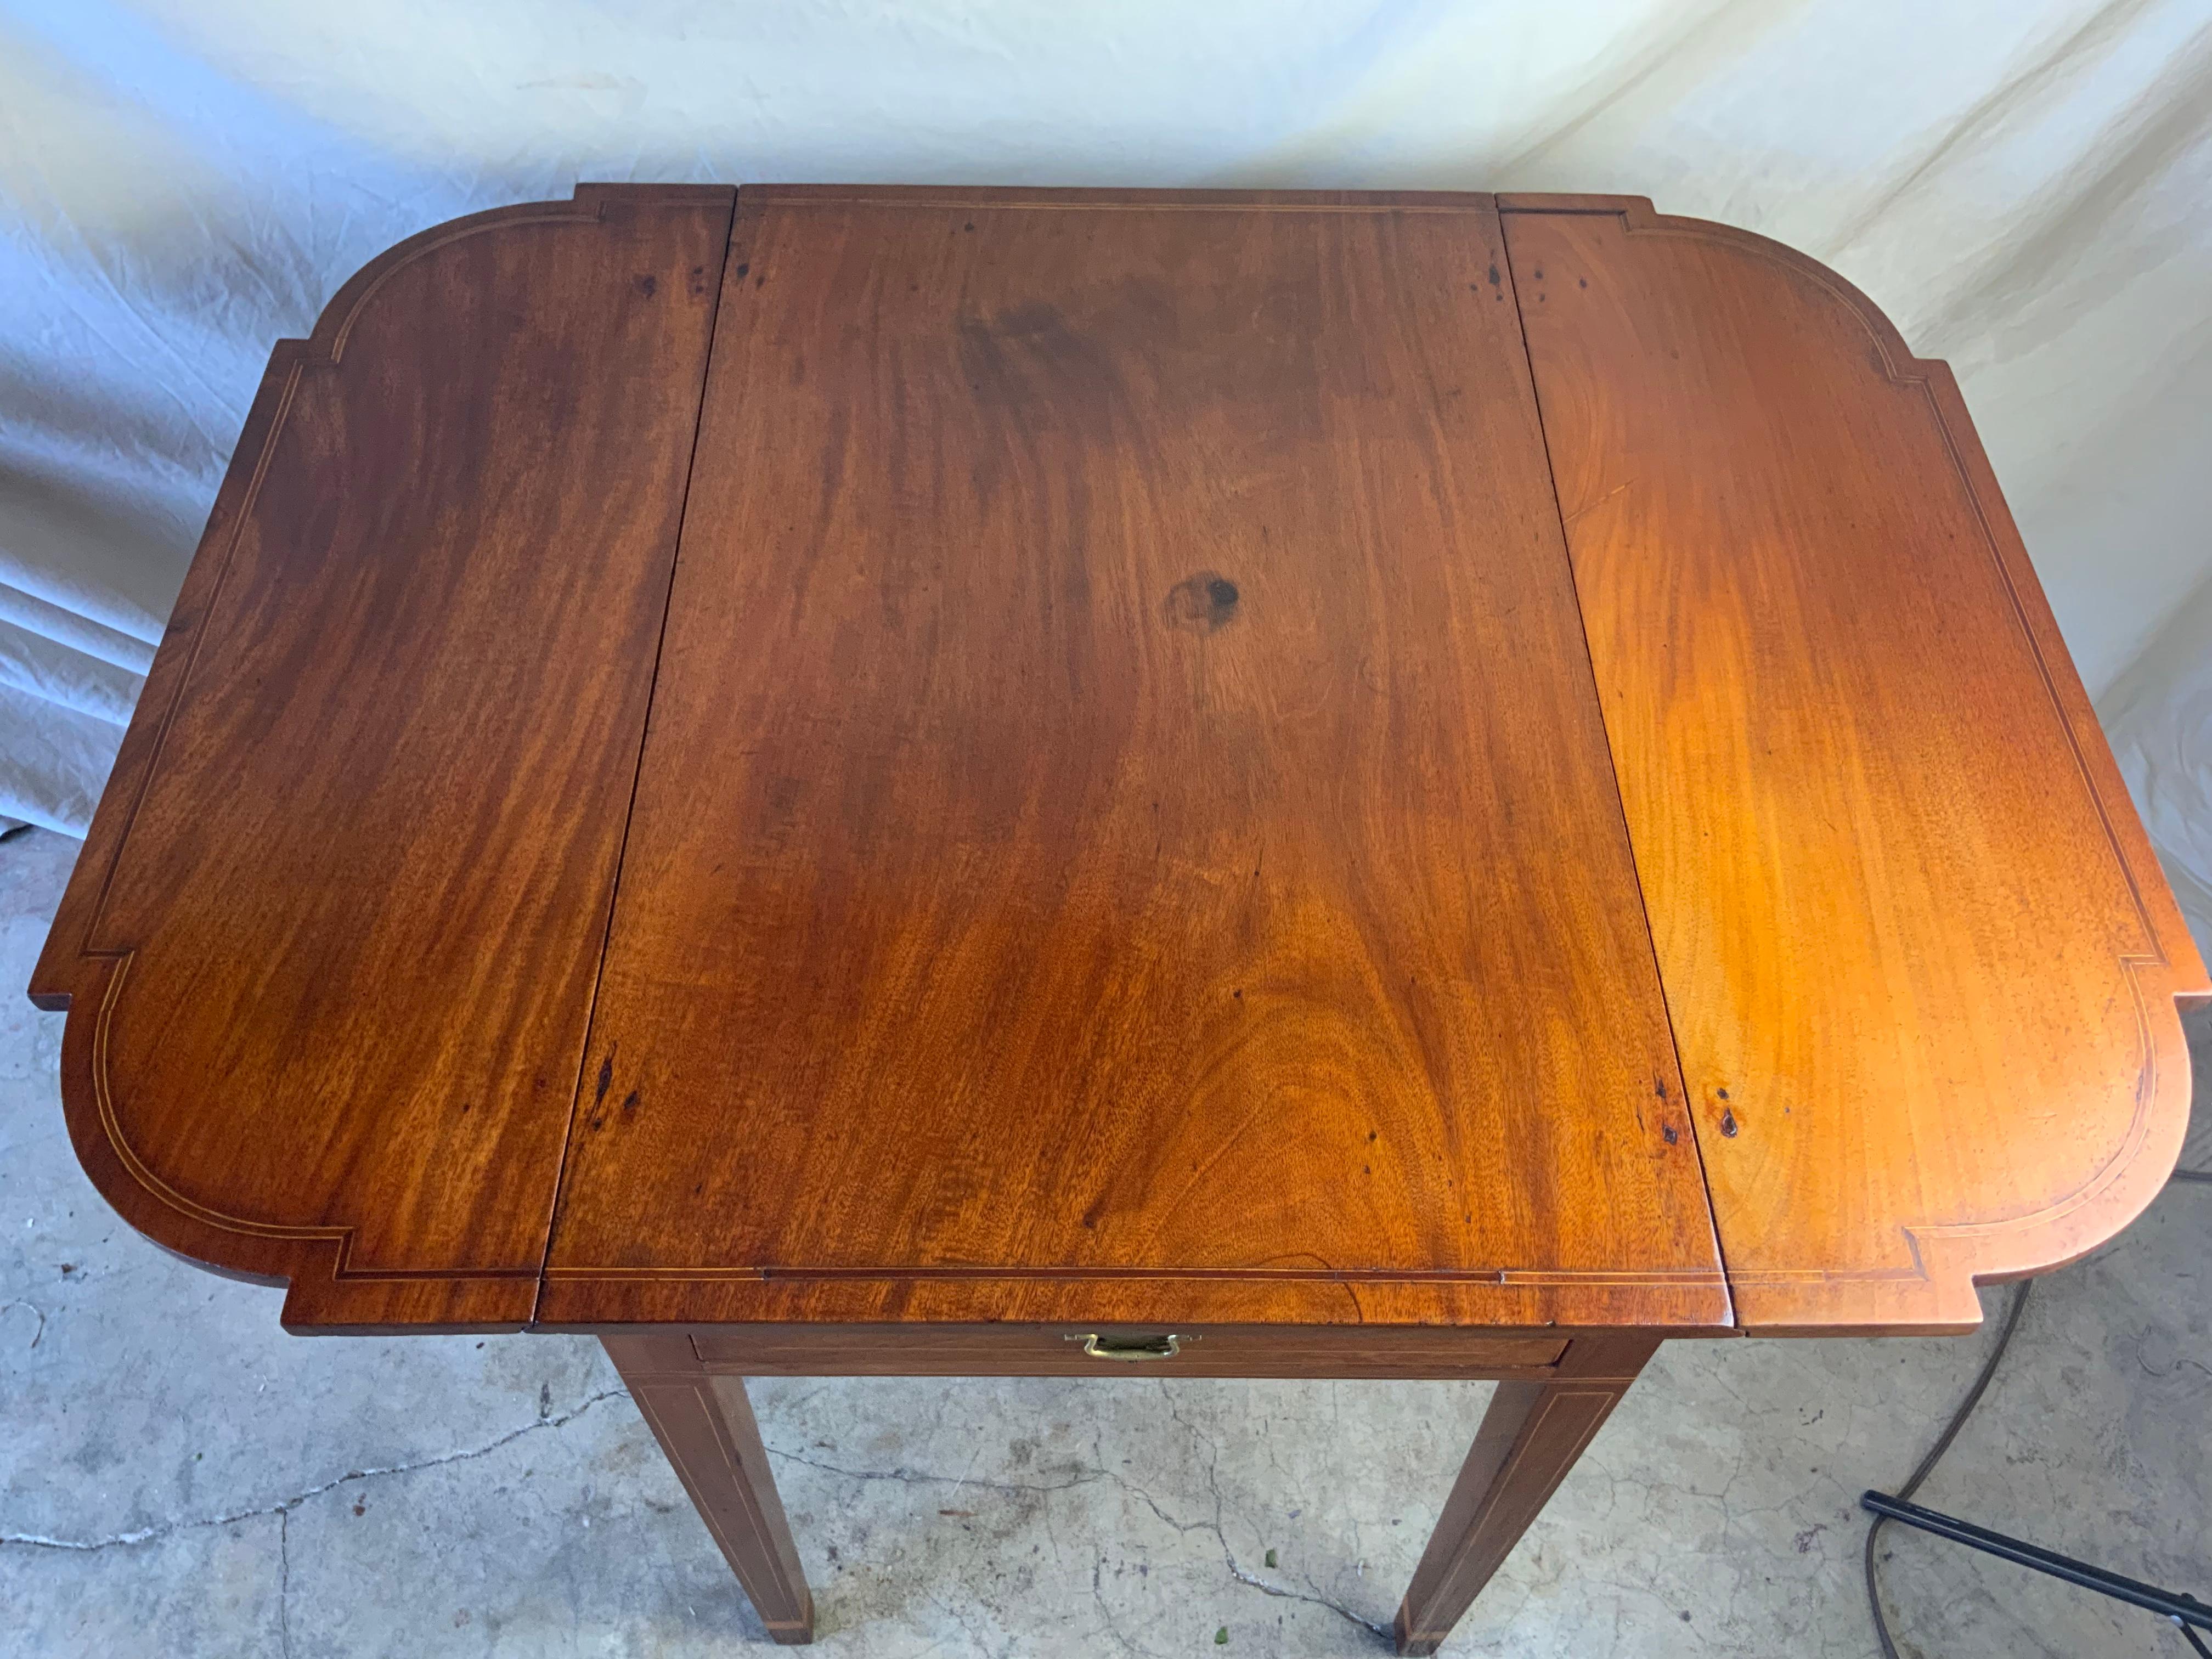 A very nice Mahogany inlay Pembroke table with cut corners on the drop leaves. Great color and patina on the old surface. Pulls on the active and fixed drawer face are a later replacement. All hinges are original to the piece. Wear and surface